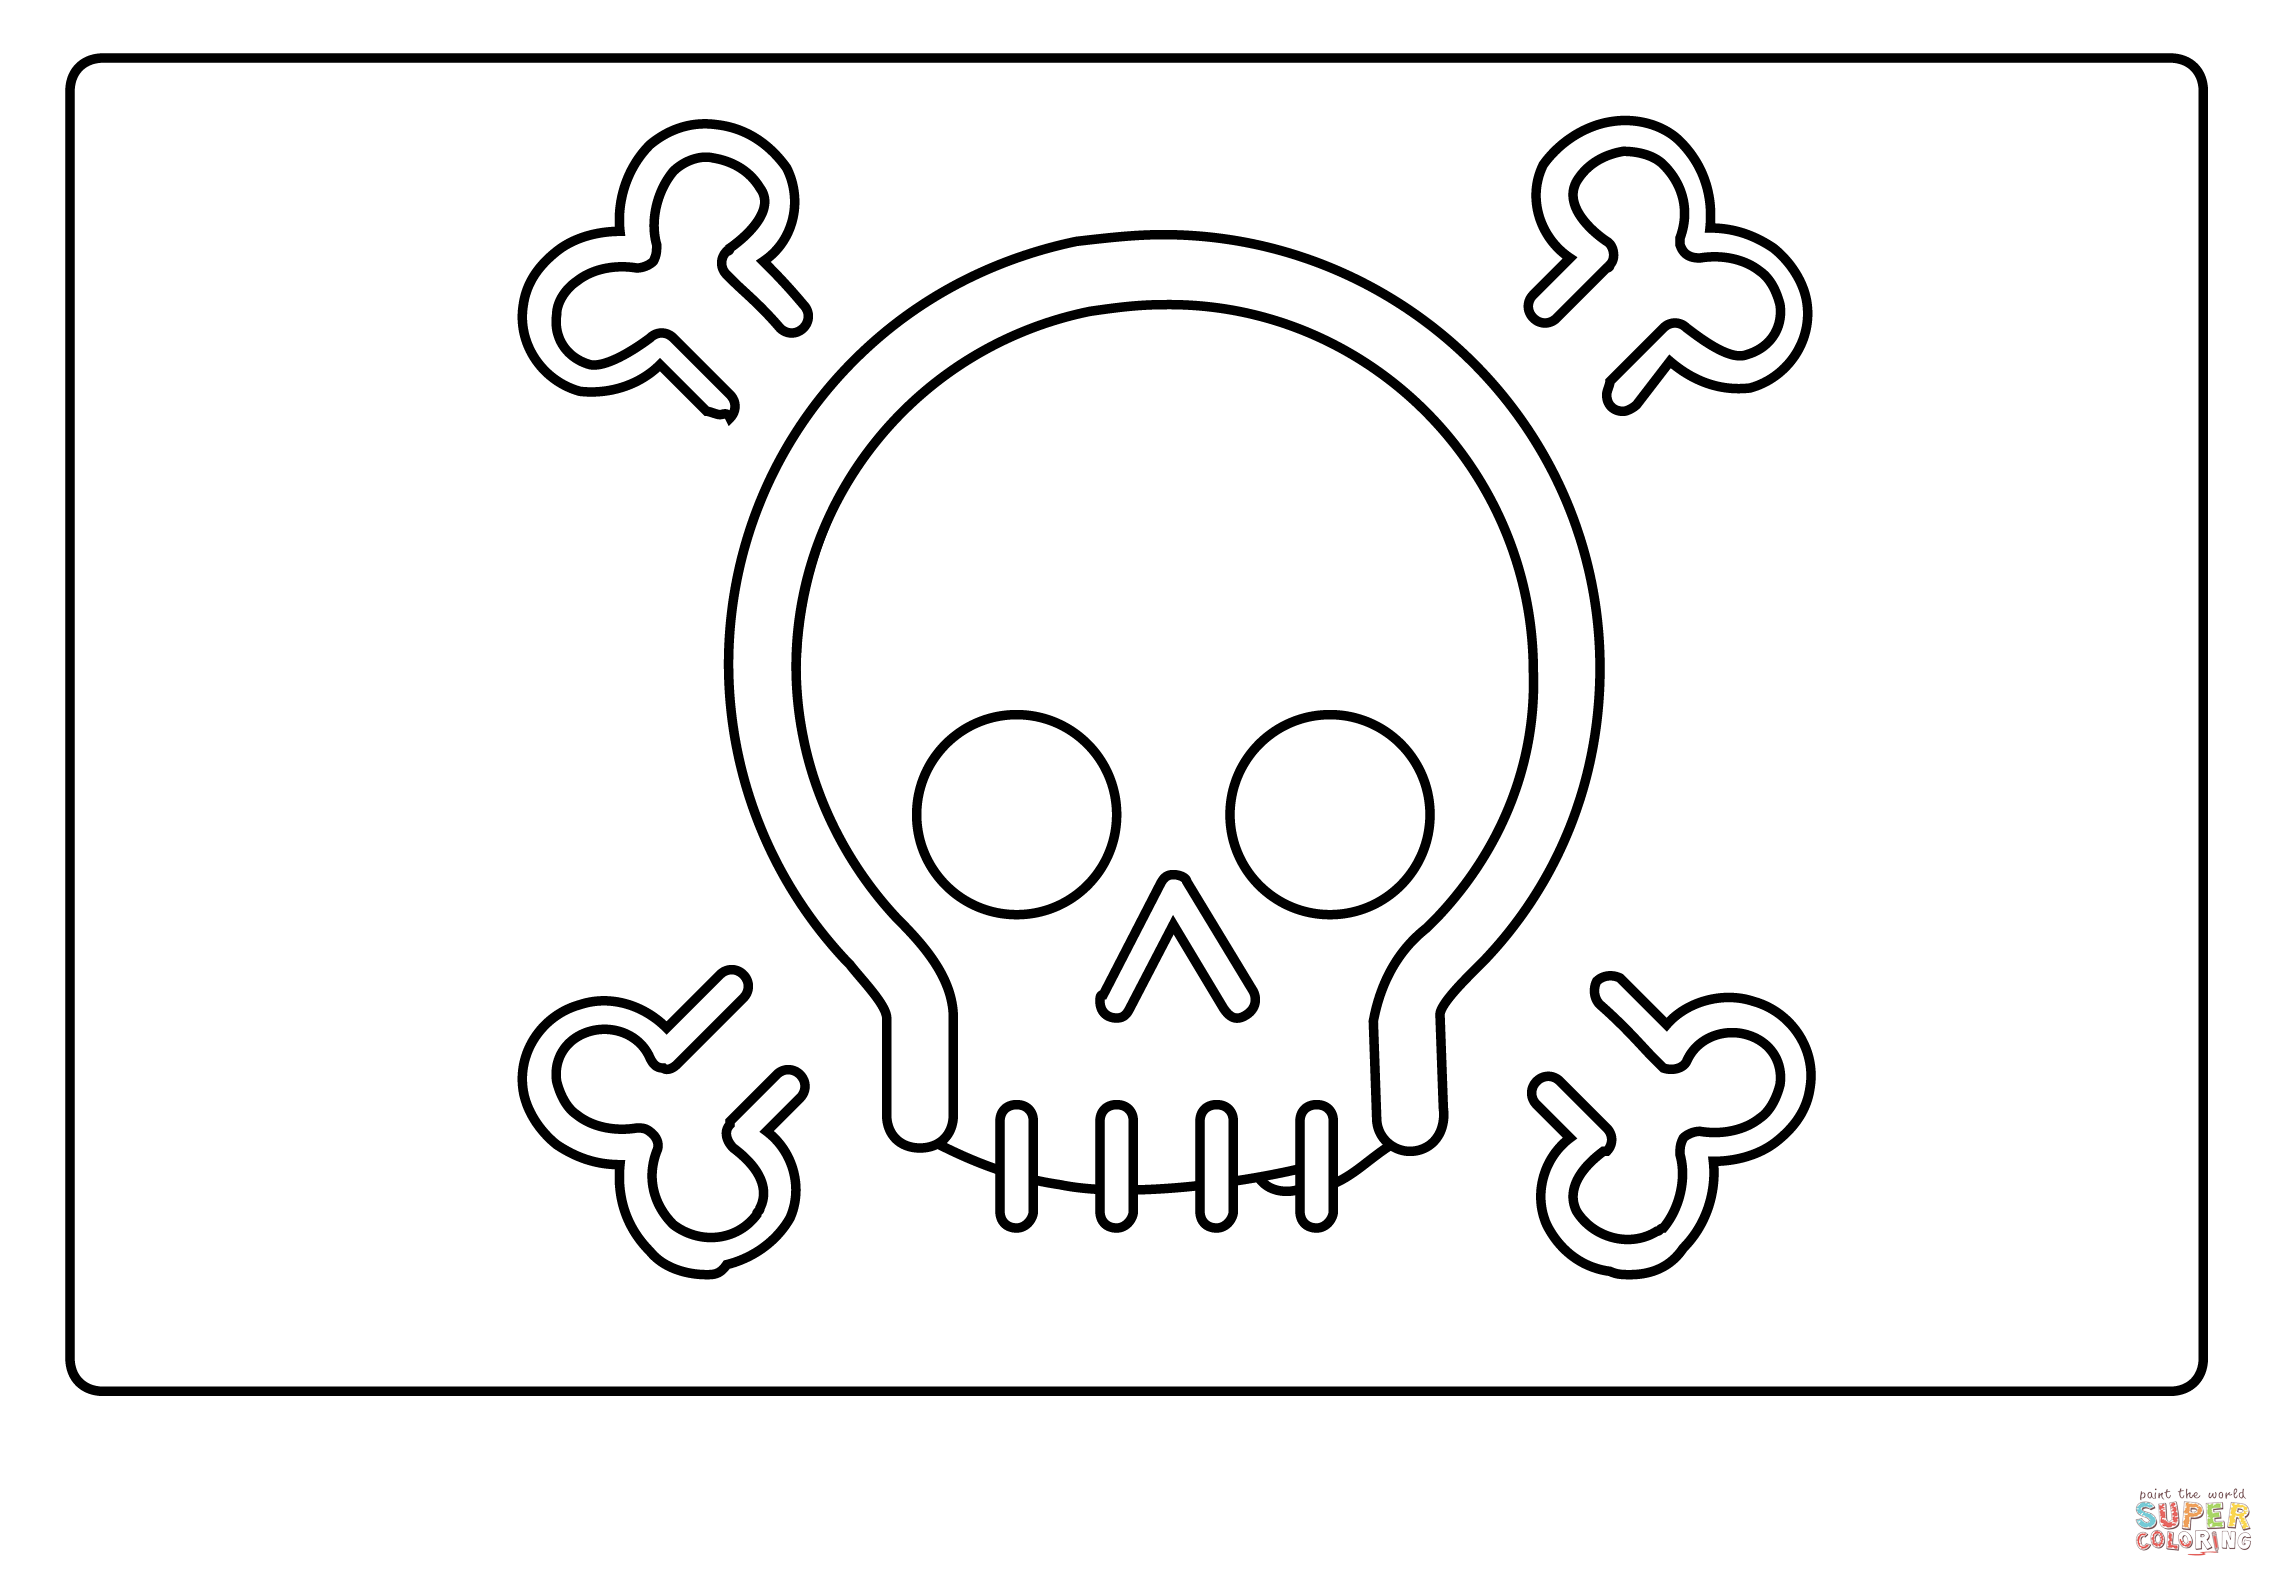 Pirate flag emoji coloring page free printable coloring pages